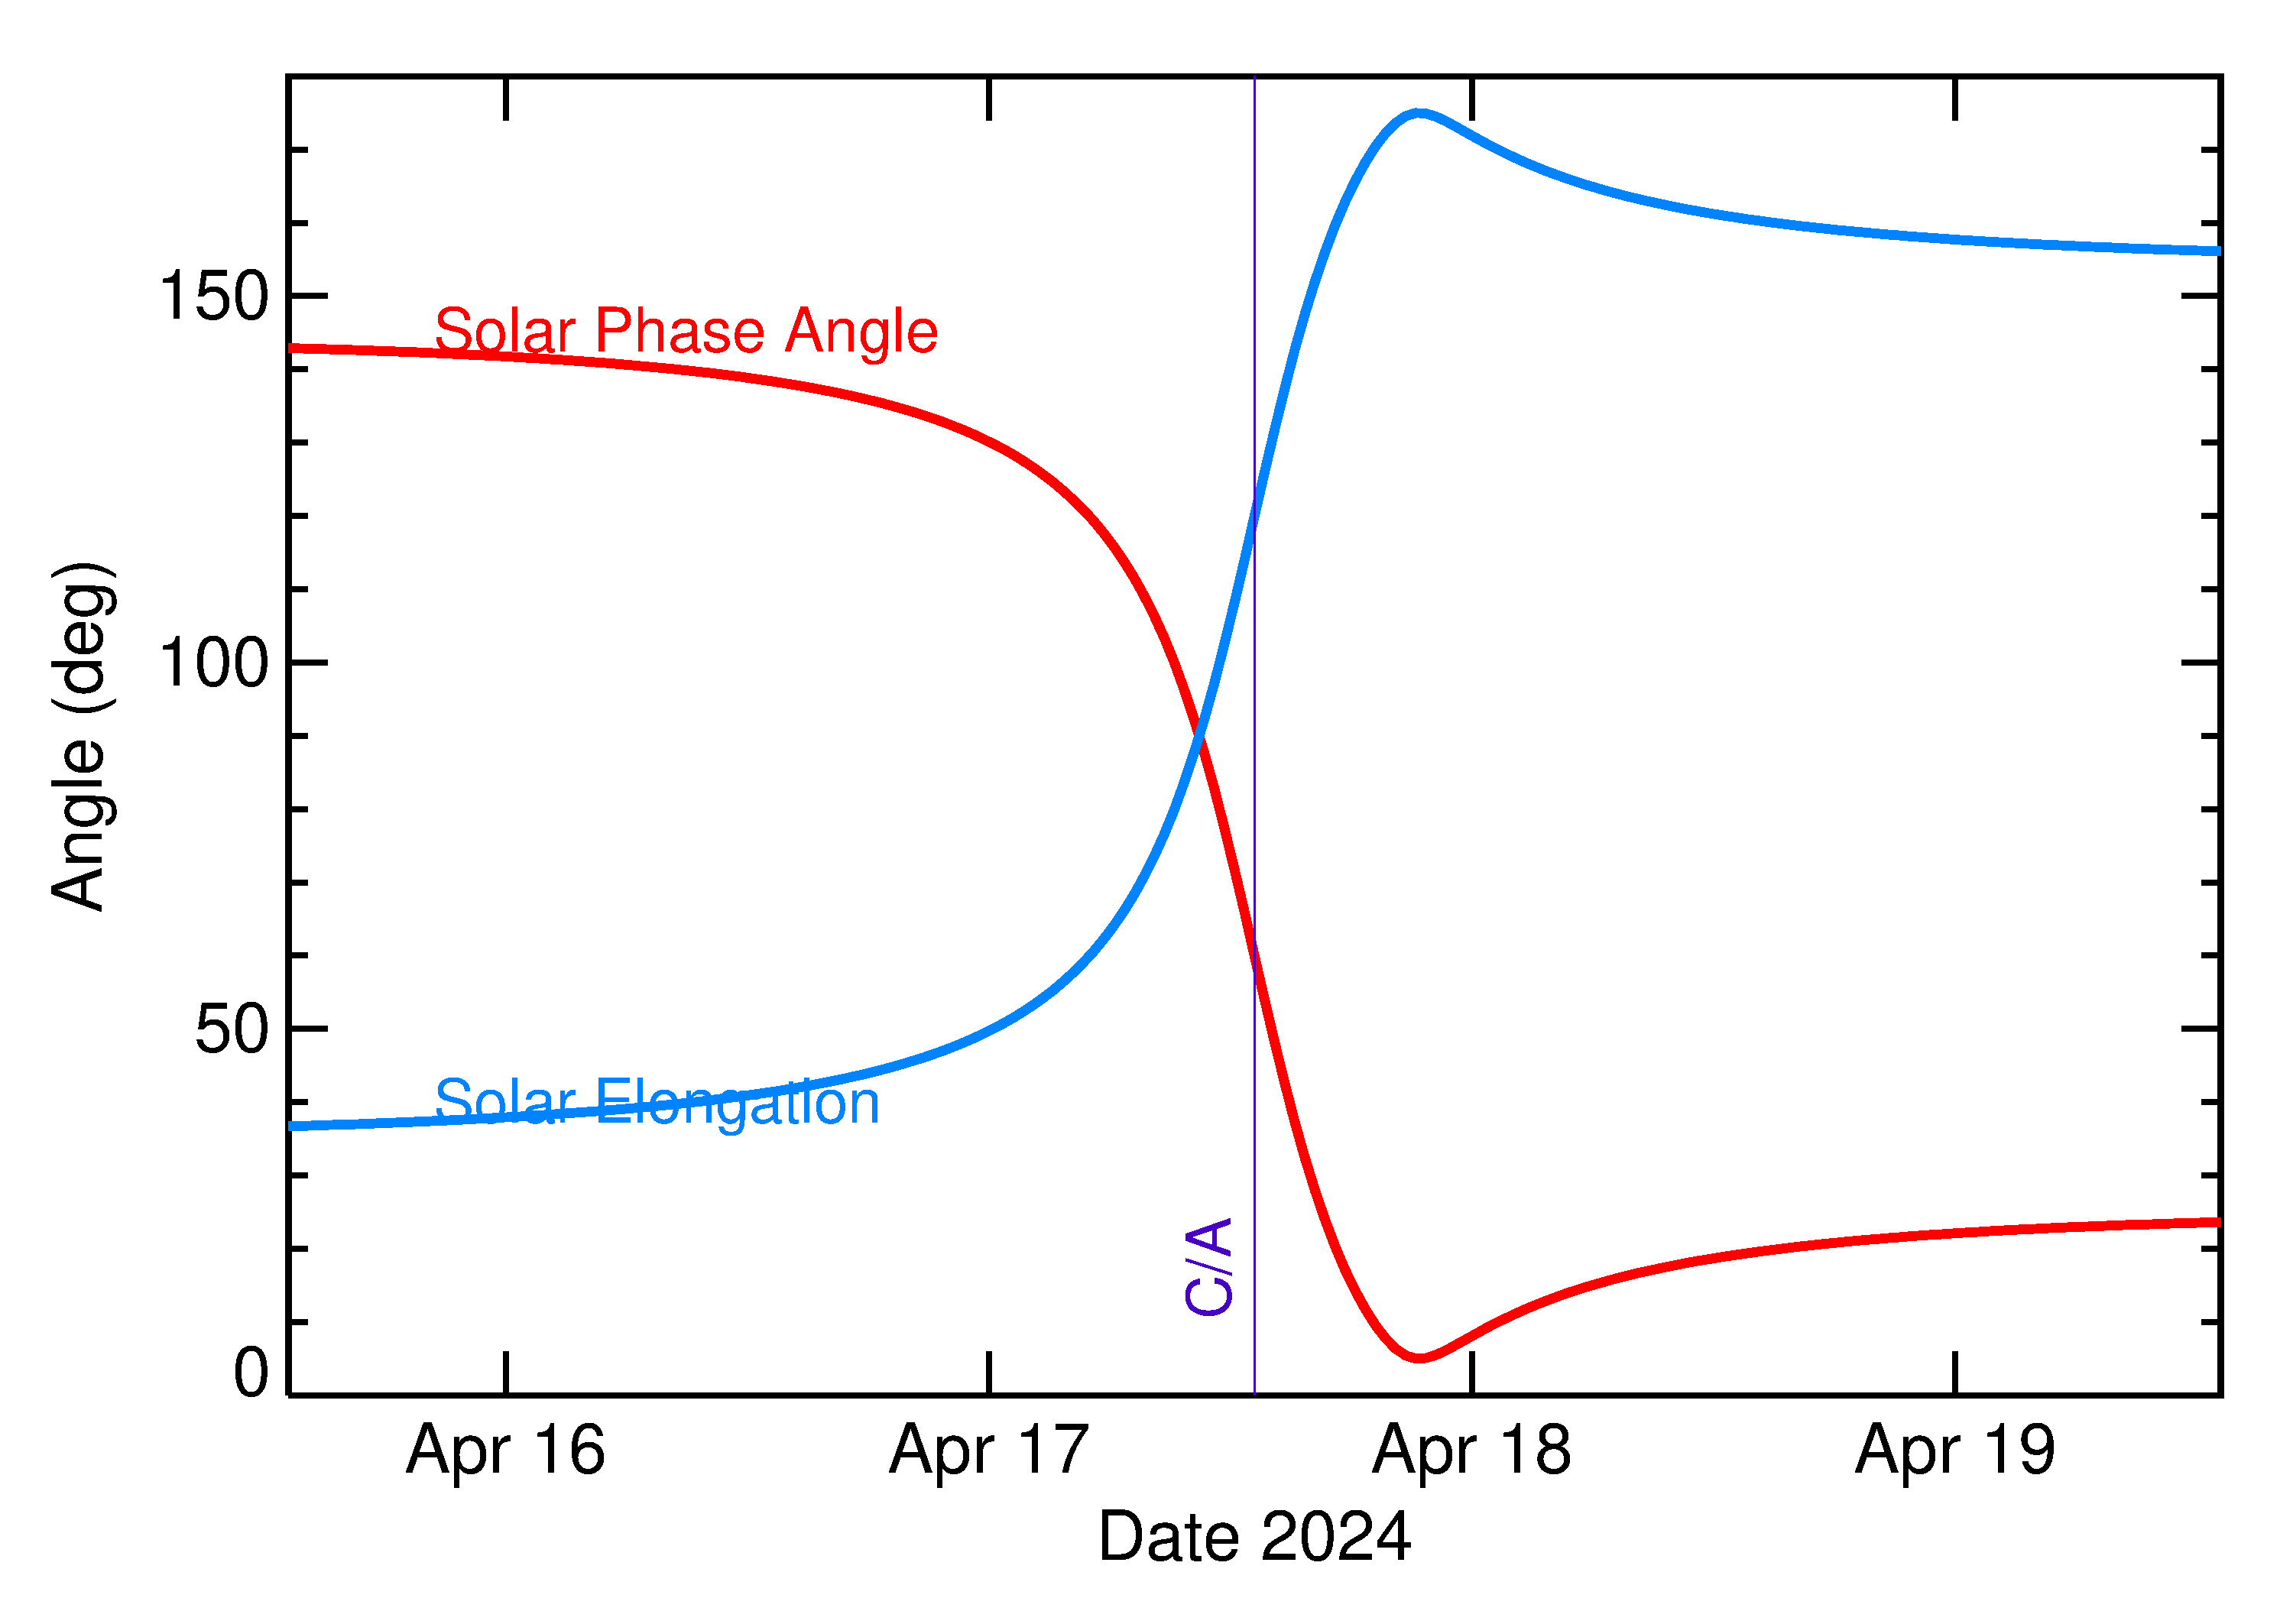 Solar Elongation and Solar Phase Angle of 2024 HO in the days around closest approach